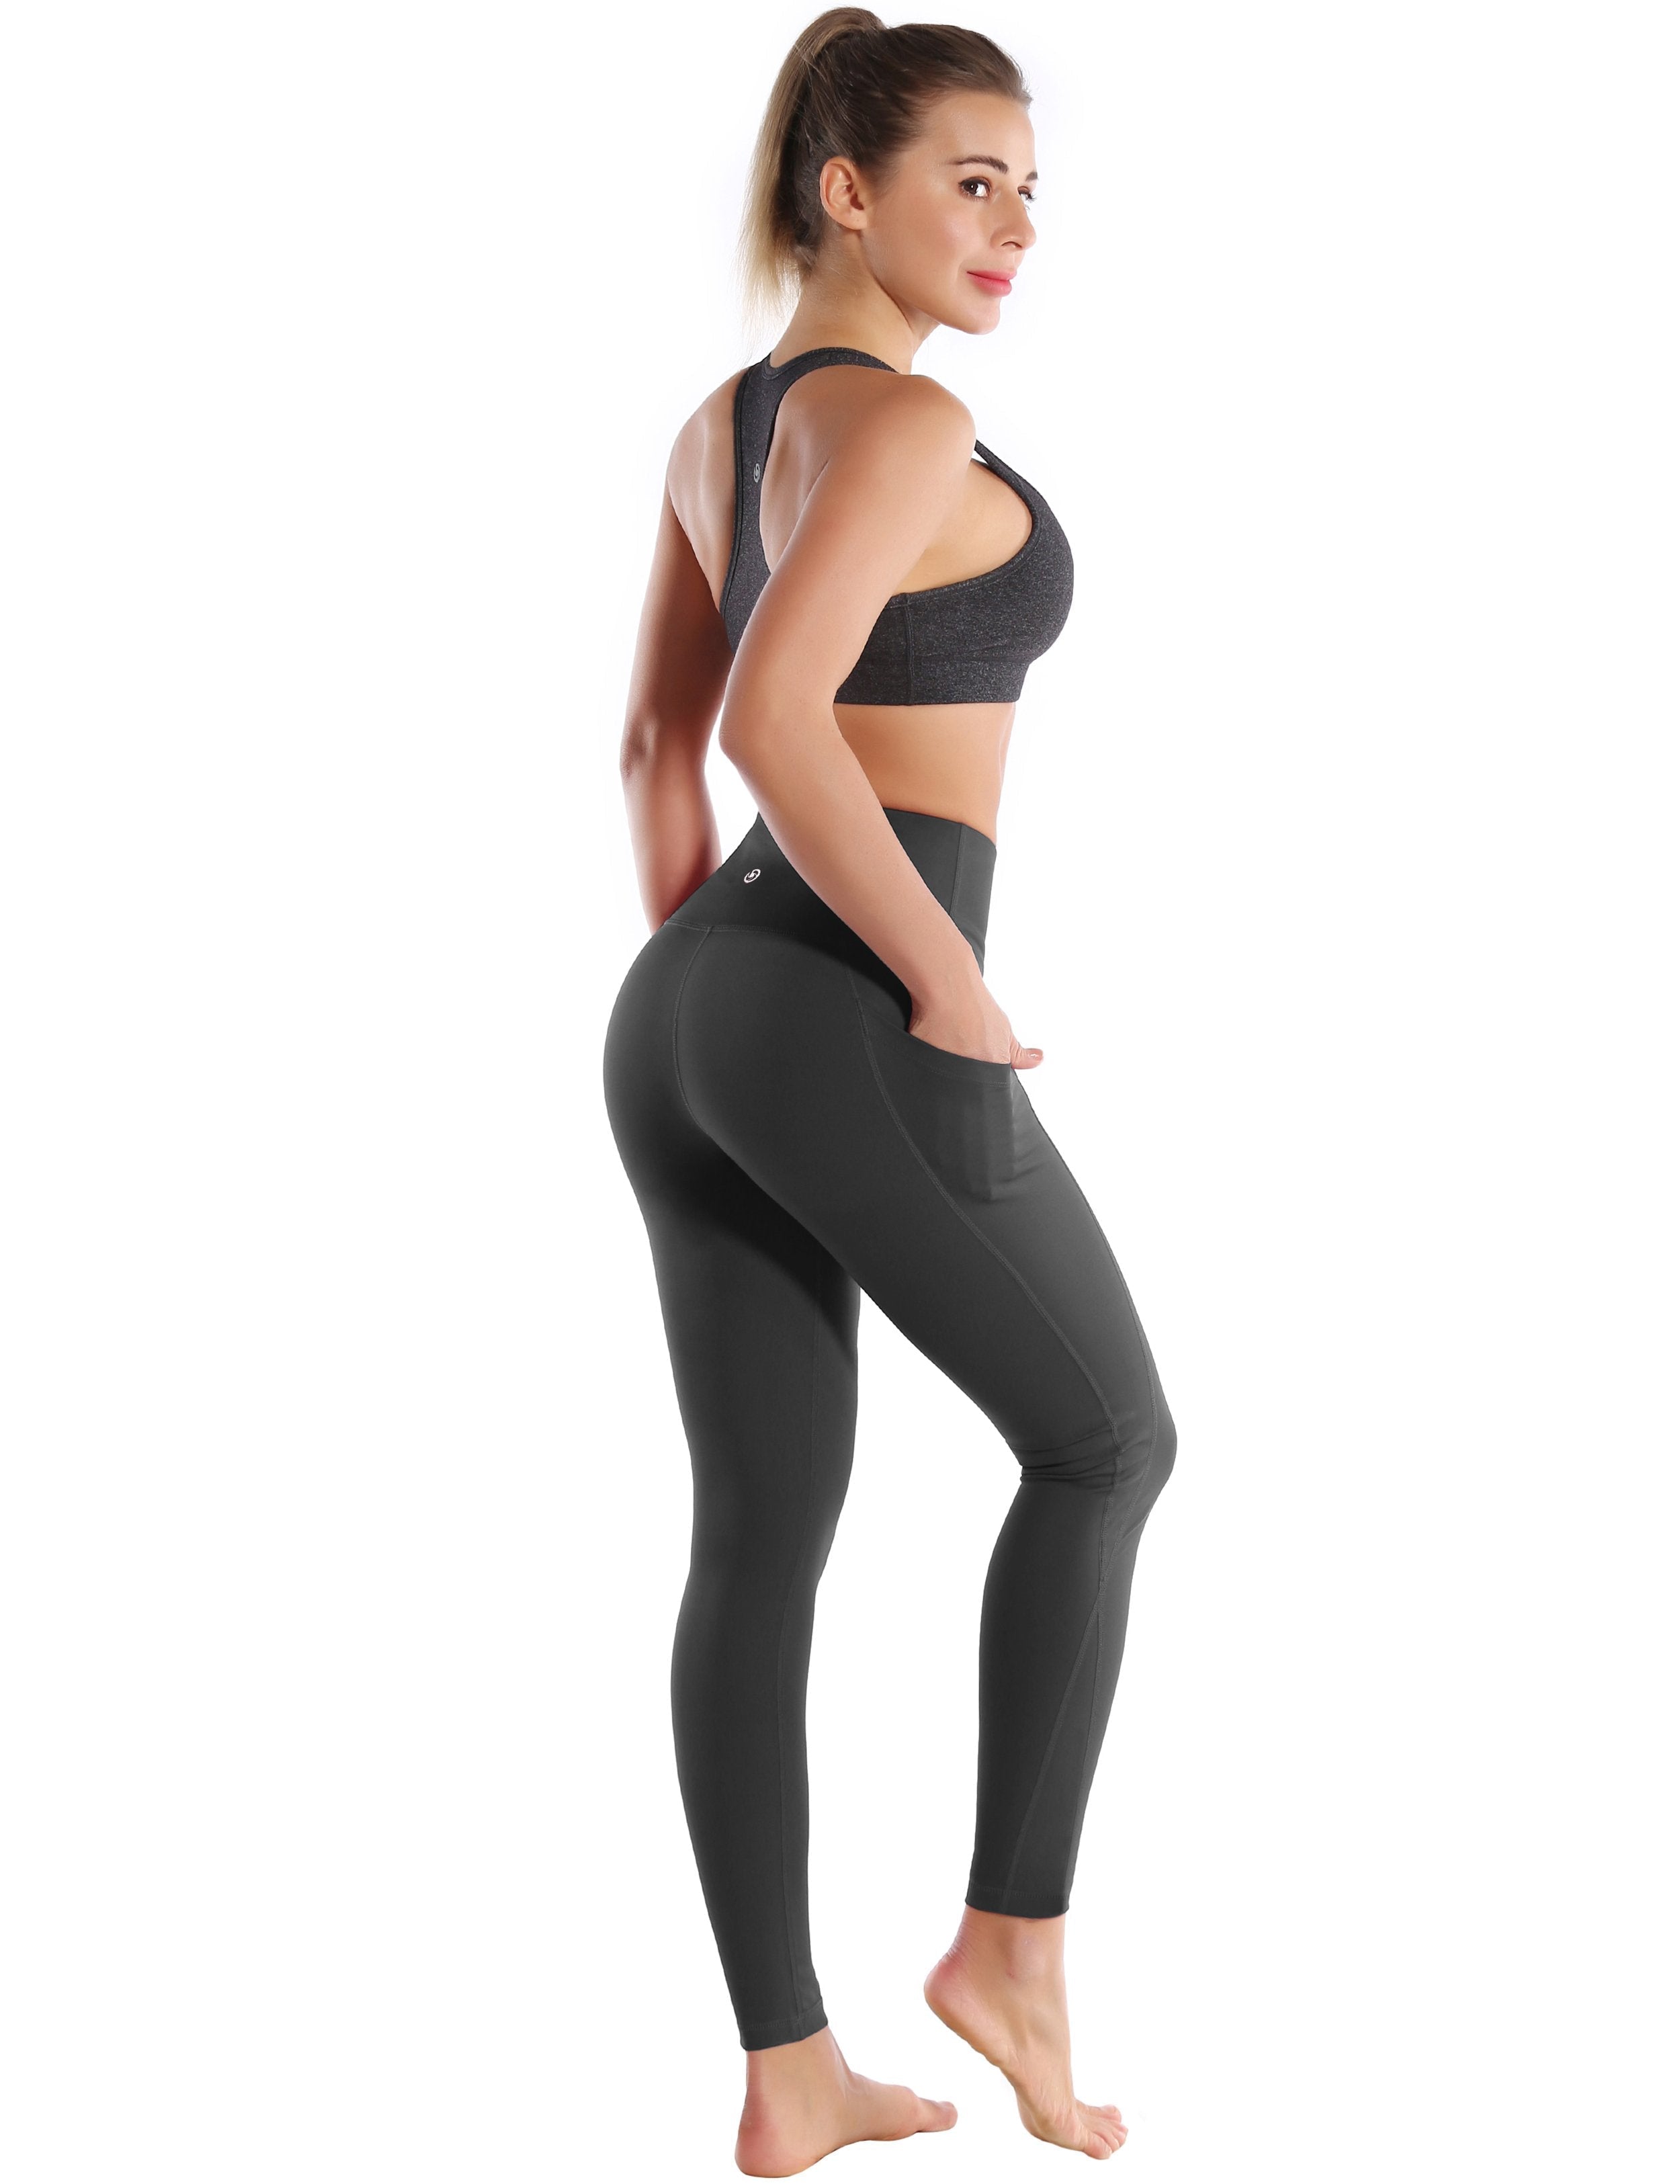 High Waist Side Pockets Running Pants shadowcharcoal 75% Nylon, 25% Spandex Fabric doesn't attract lint easily 4-way stretch No see-through Moisture-wicking Tummy control Inner pocket